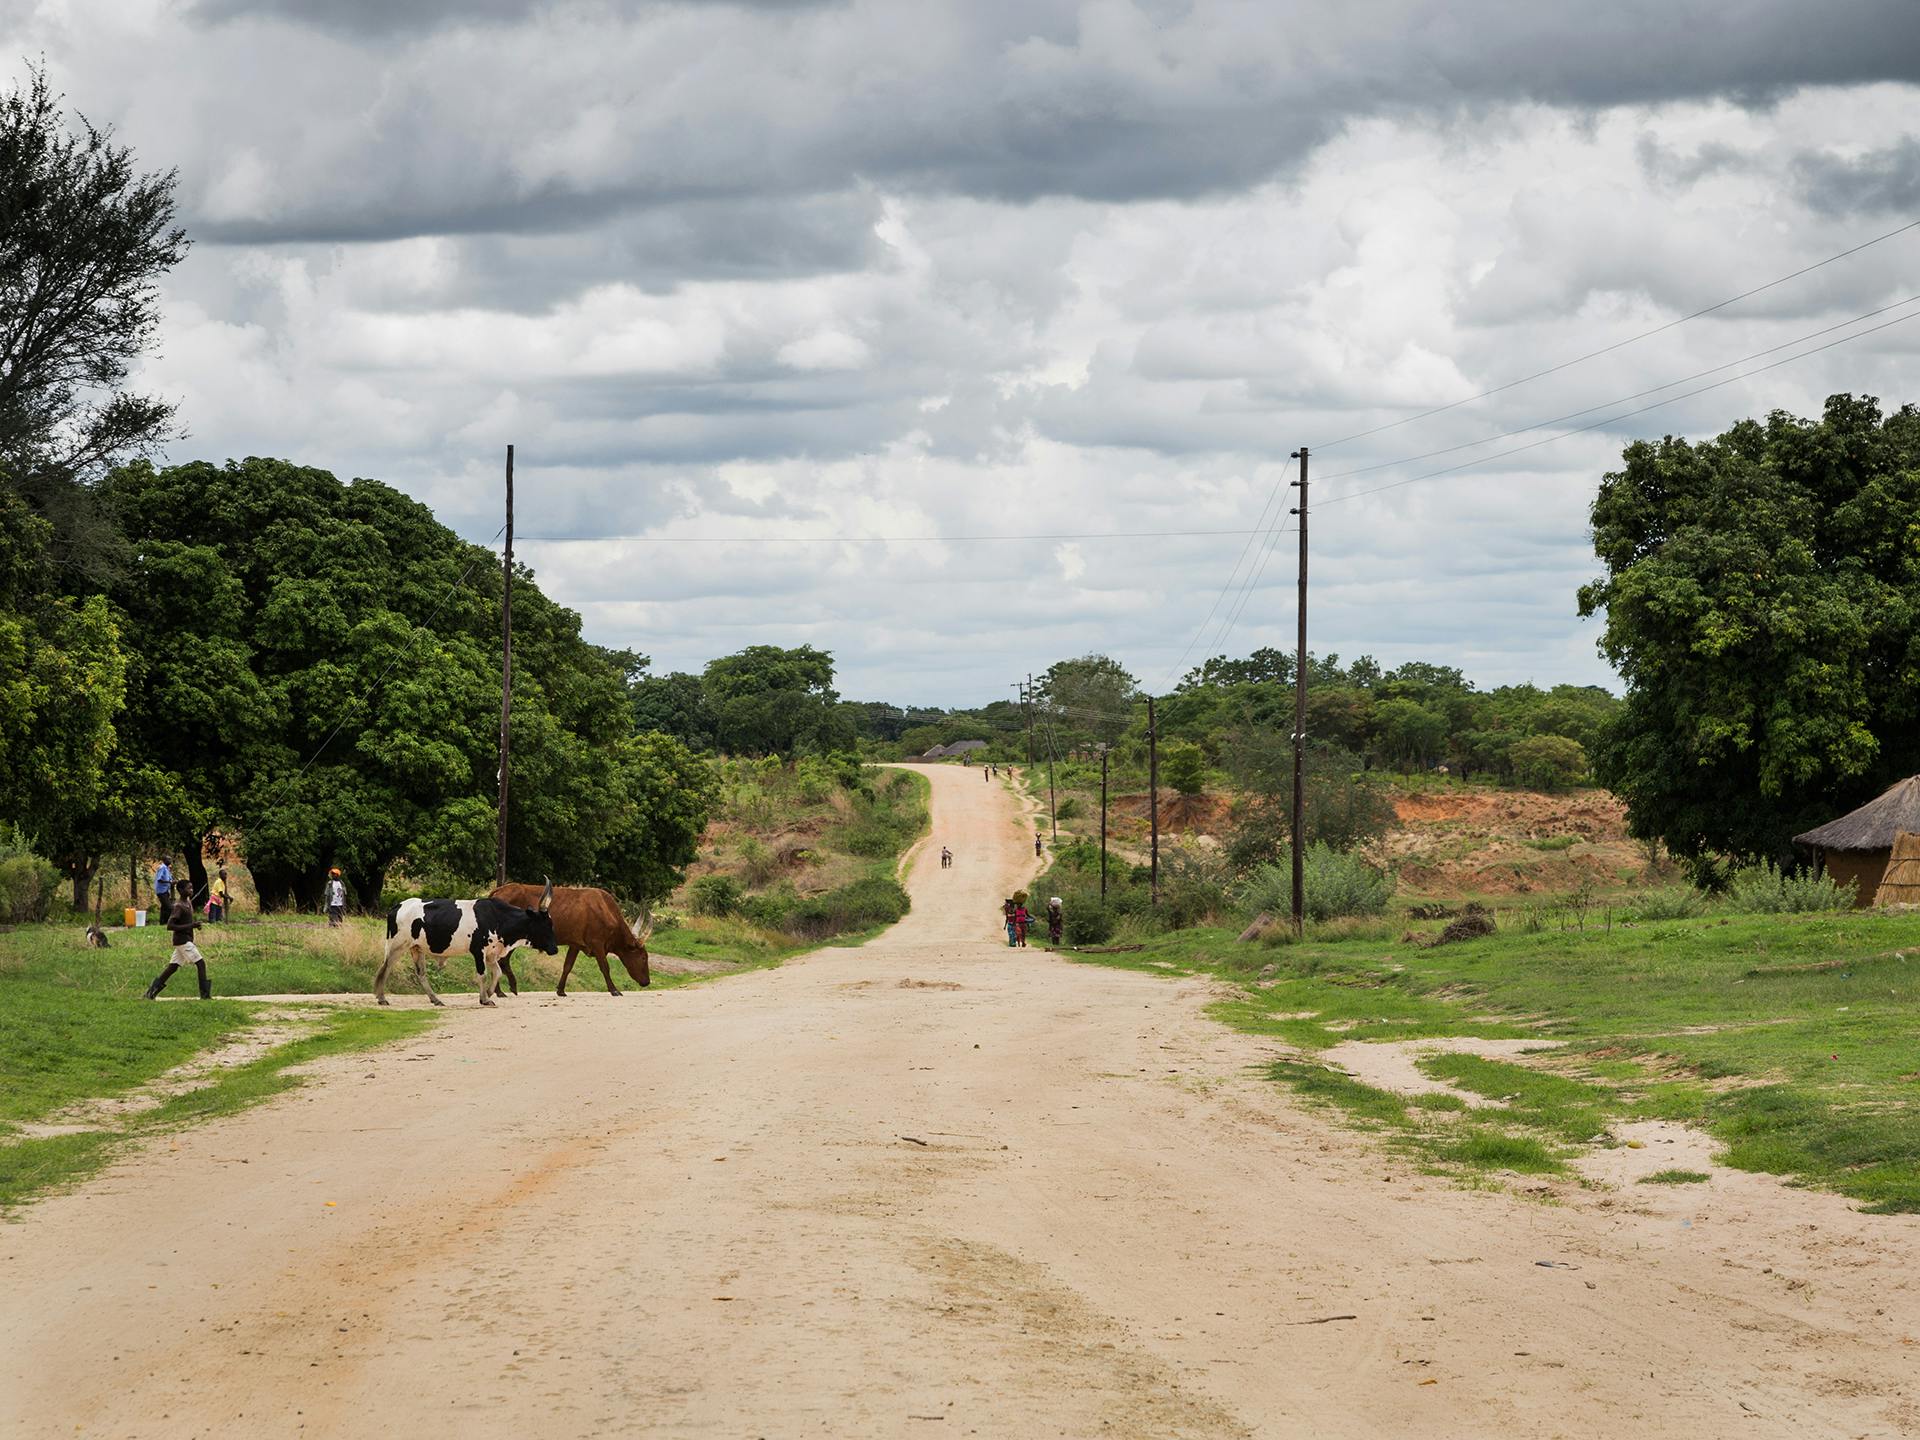 A view of a countryside road in Zambia.